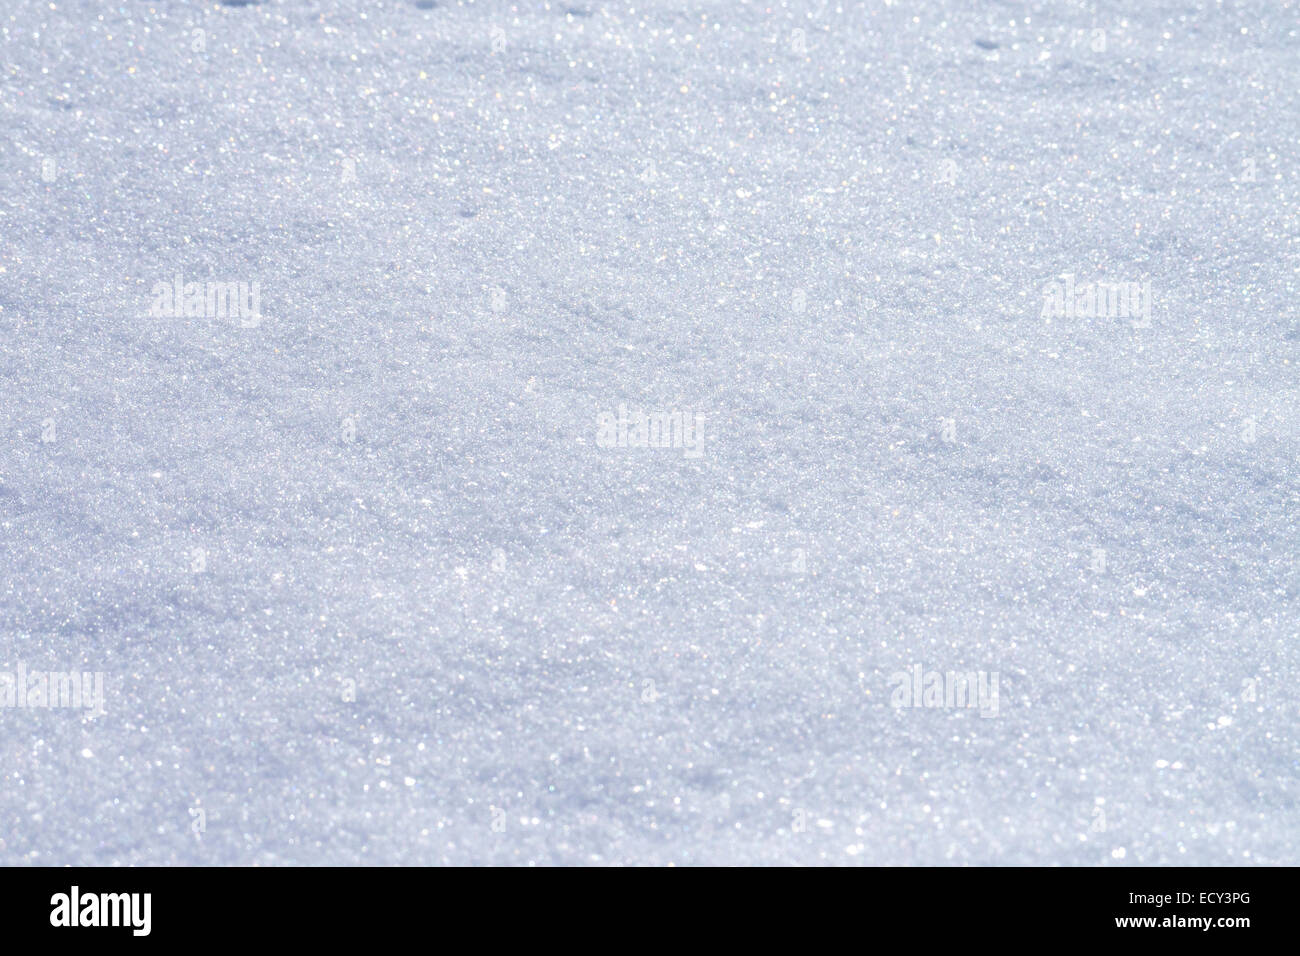 background of new fallen snow, sunreflections Stock Photo